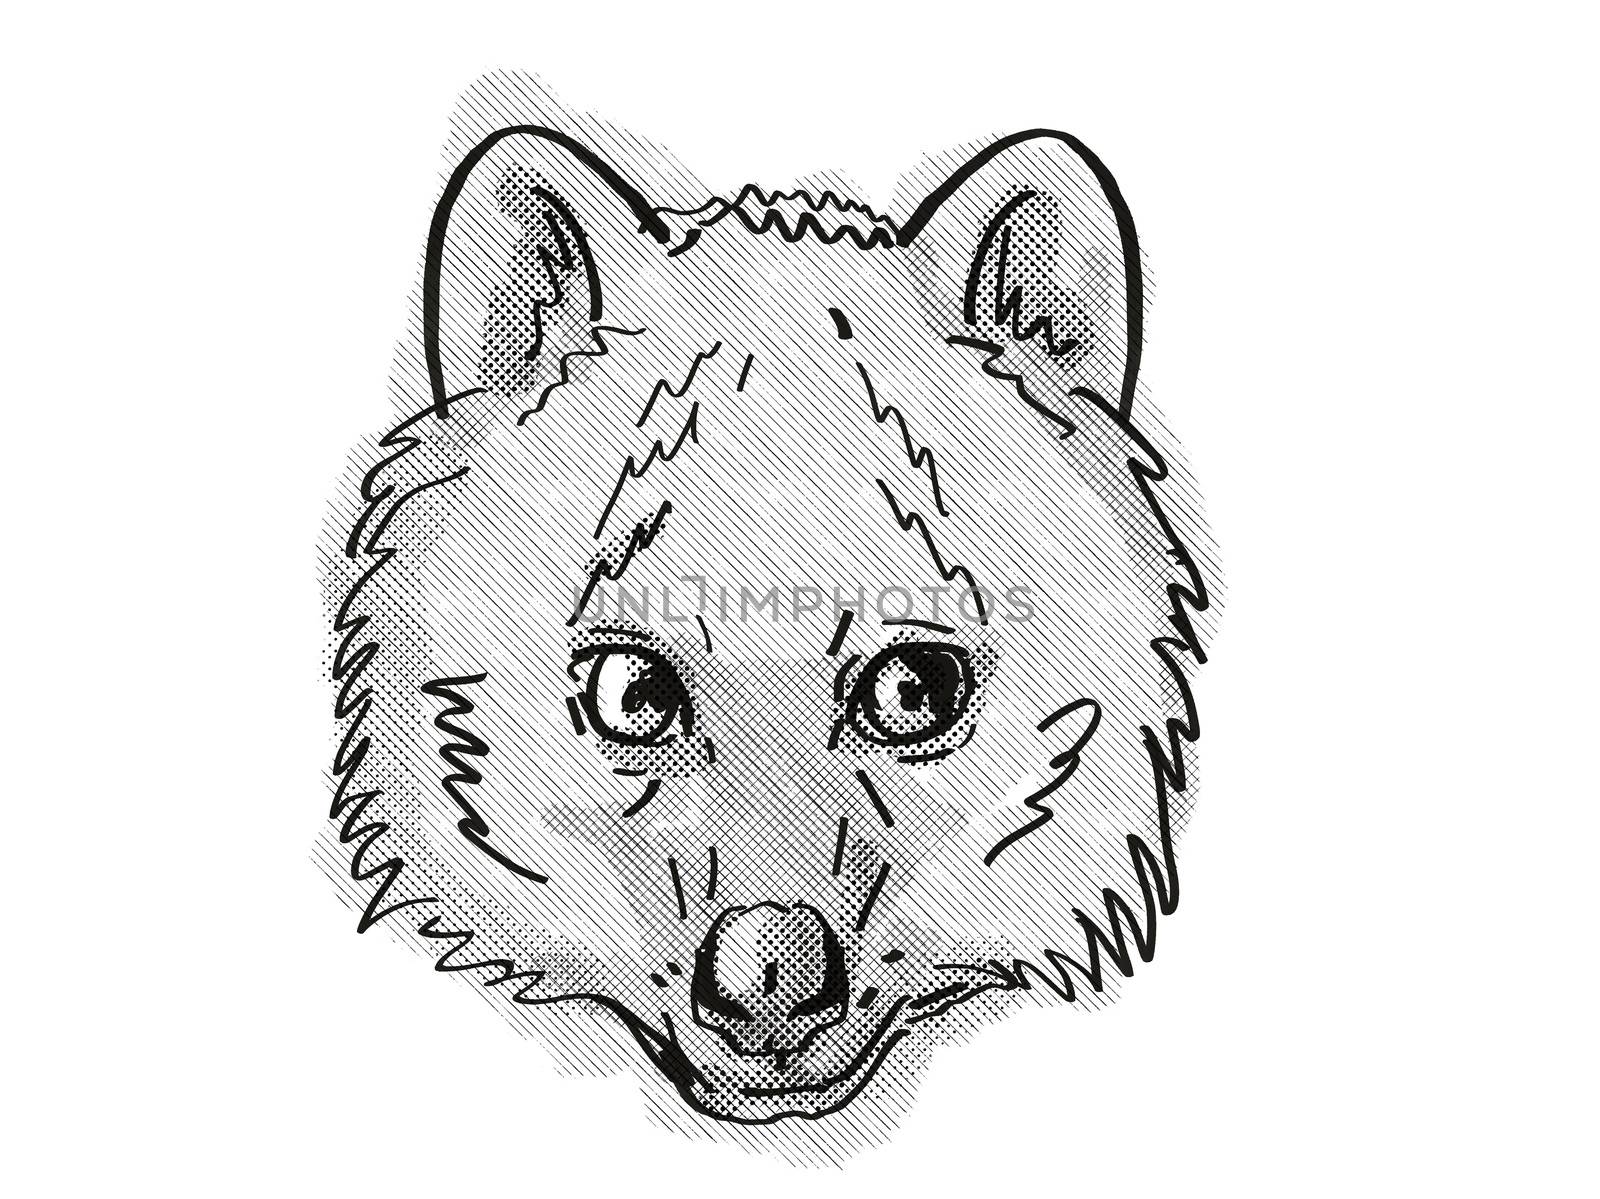 Retro cartoon style drawing of head of a Quokka, a small marsupial found in  south-west of Australia and an endangered wildlife species on isolated white background done in black and white.